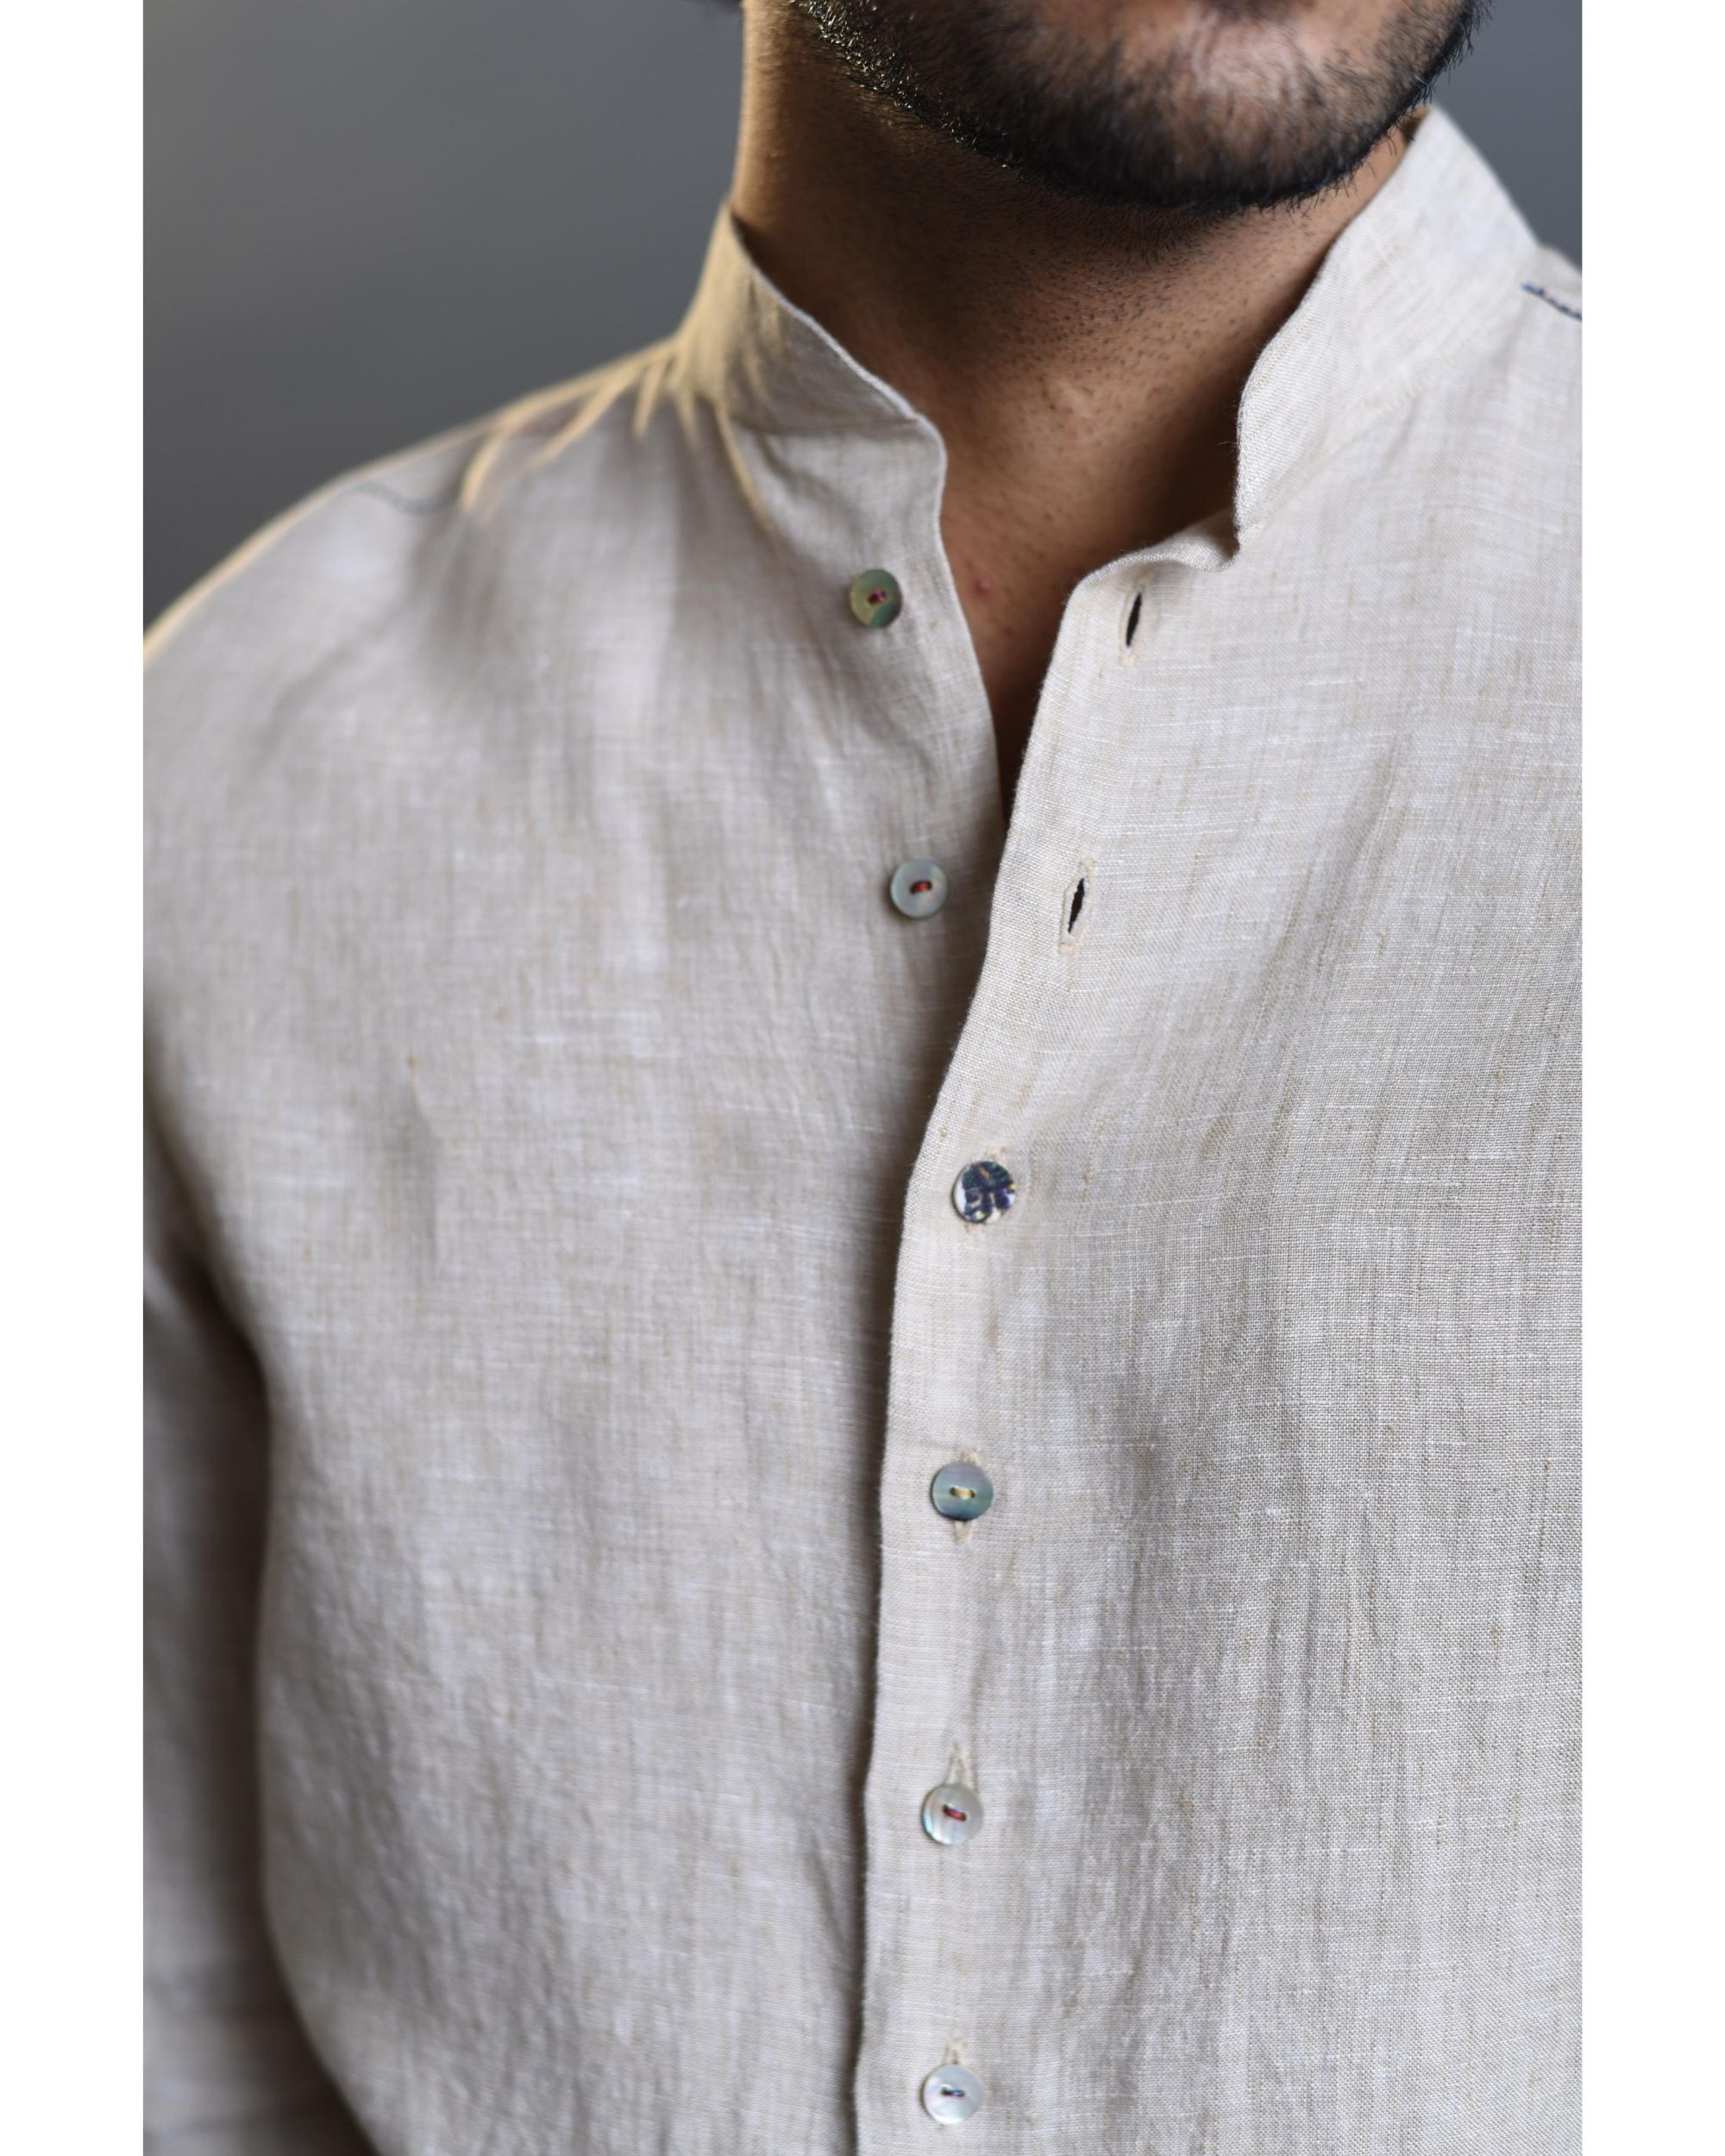 Beige pleated shirt by M-Squared by Manik Mongia | The Secret Label